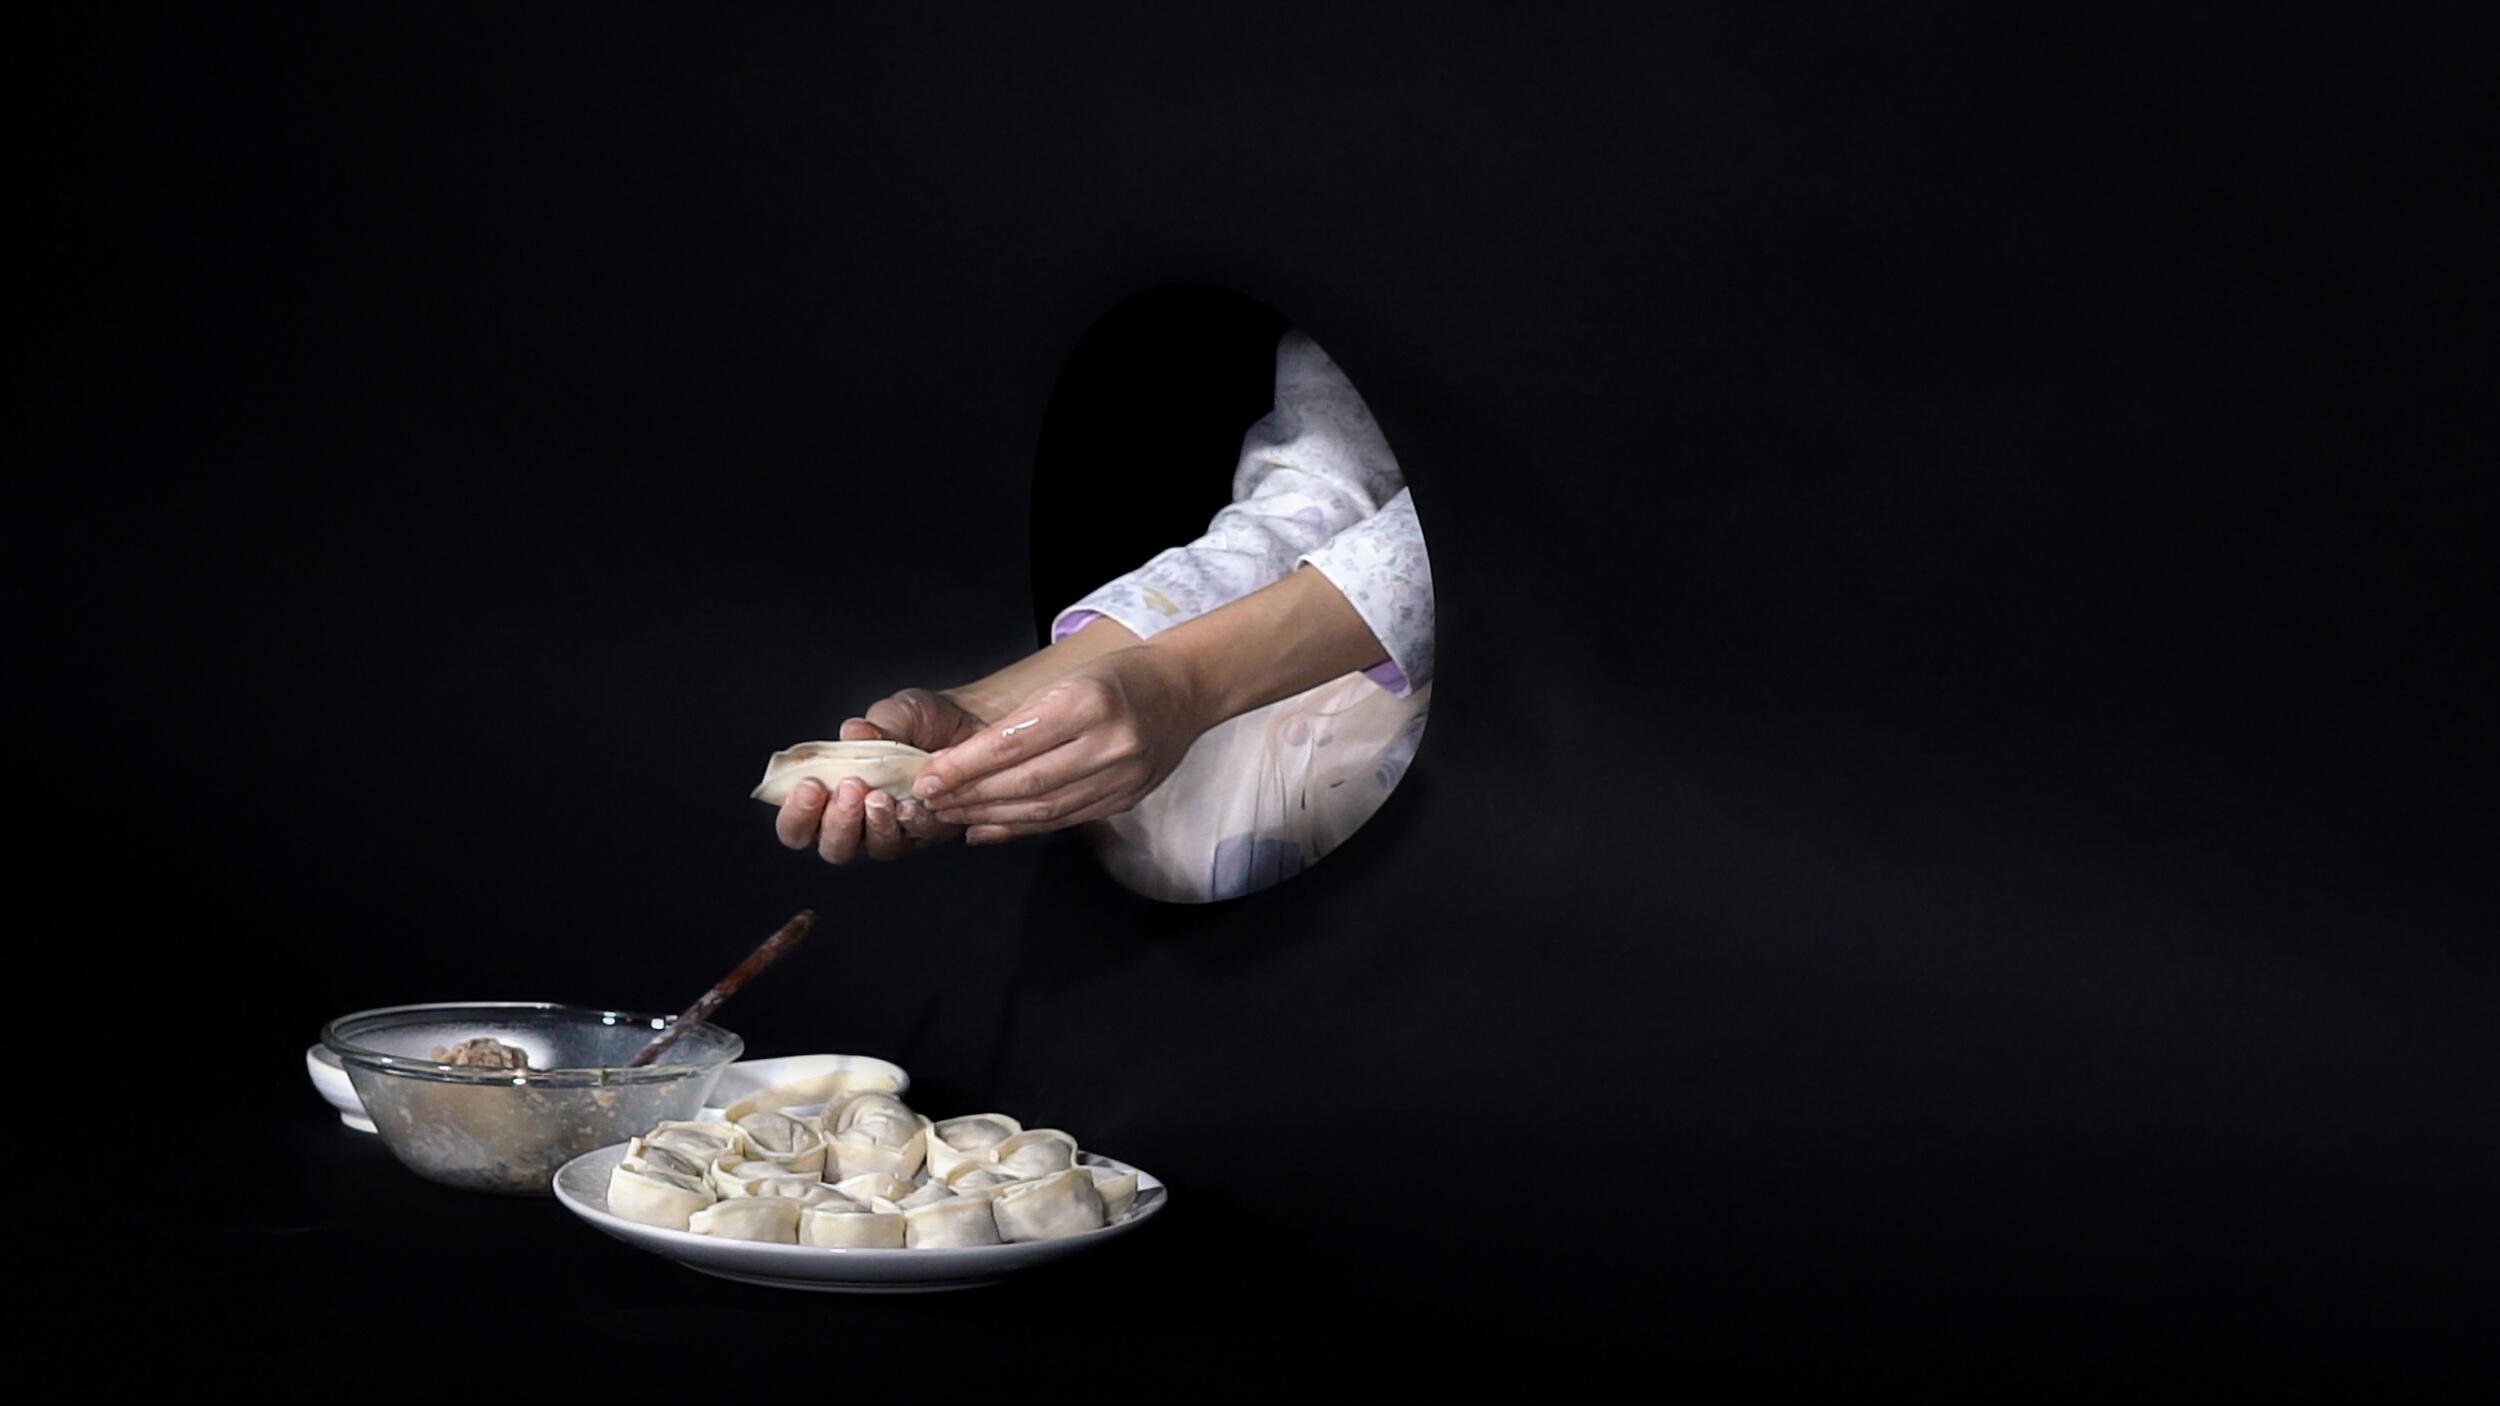 An image from Cecilia Hankyeol Kim's \"Performed Labor.\" Two hands filling a dumpling in front of a bowl of filling which is next to a plate of prepared dumplings. 